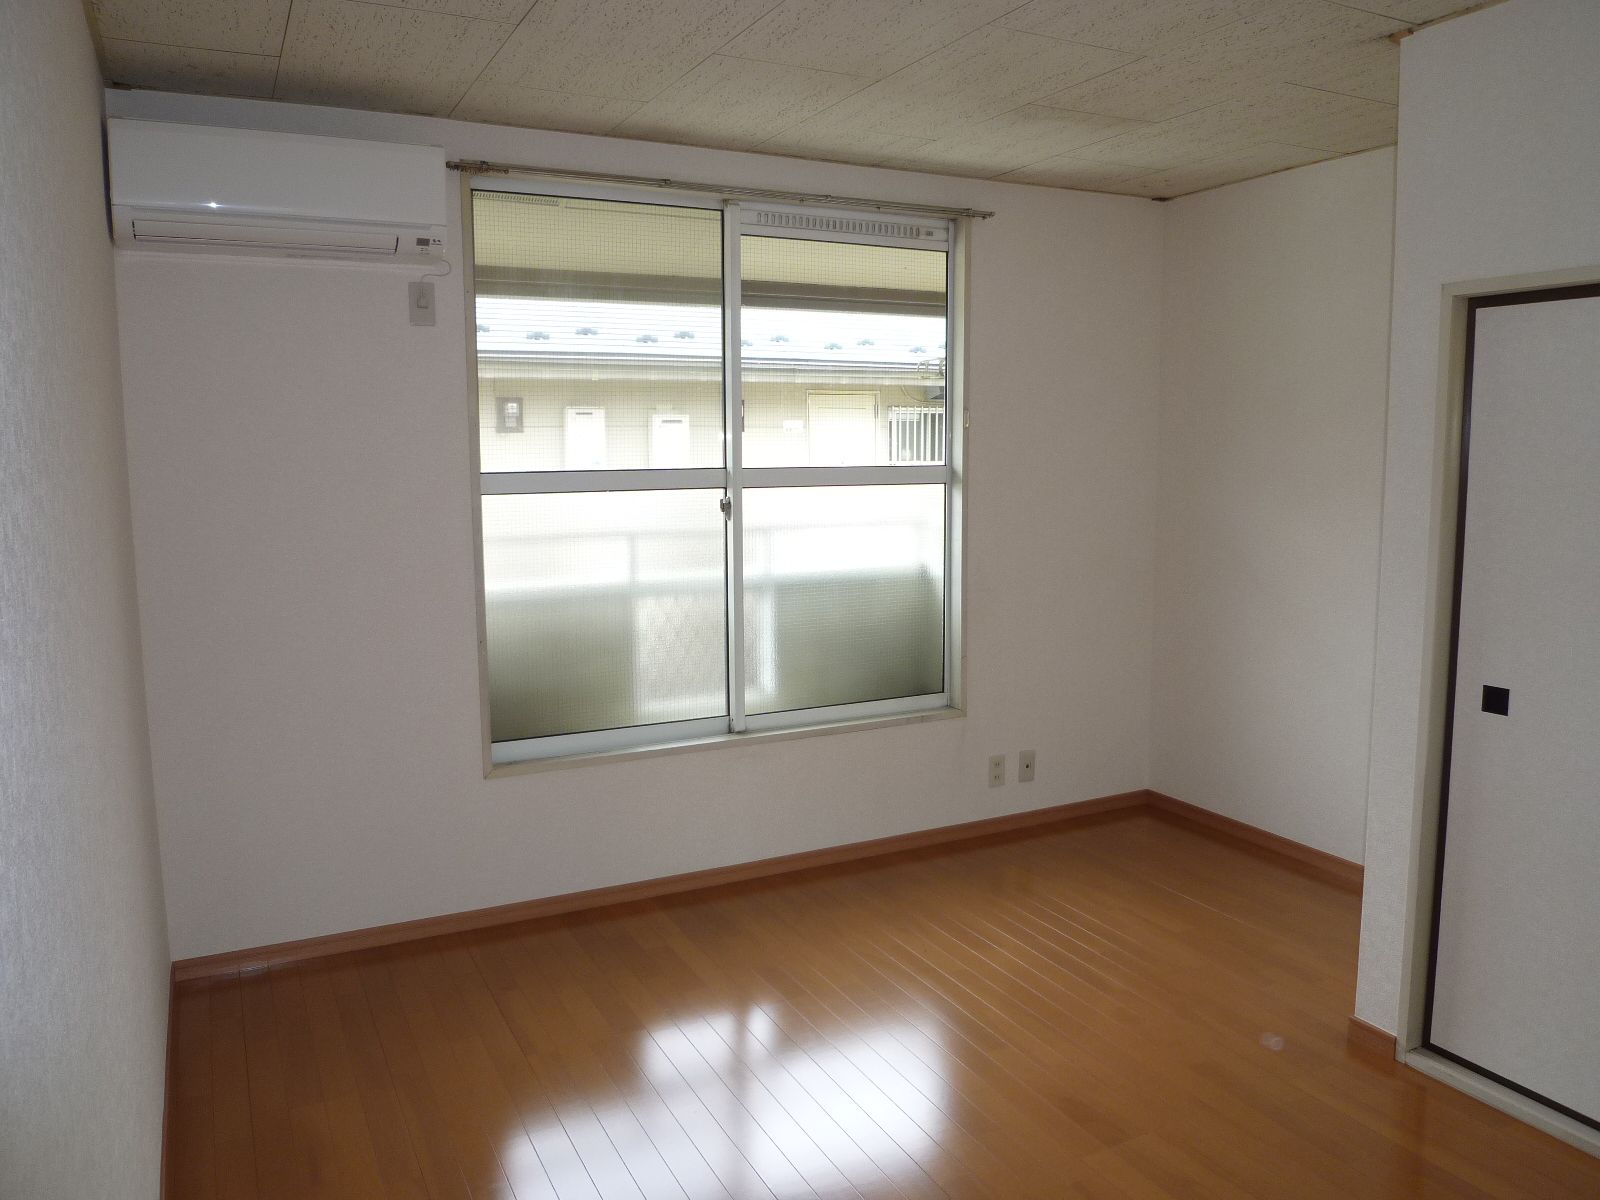 Living and room. A bright room! Wooden floors of cleanliness! 